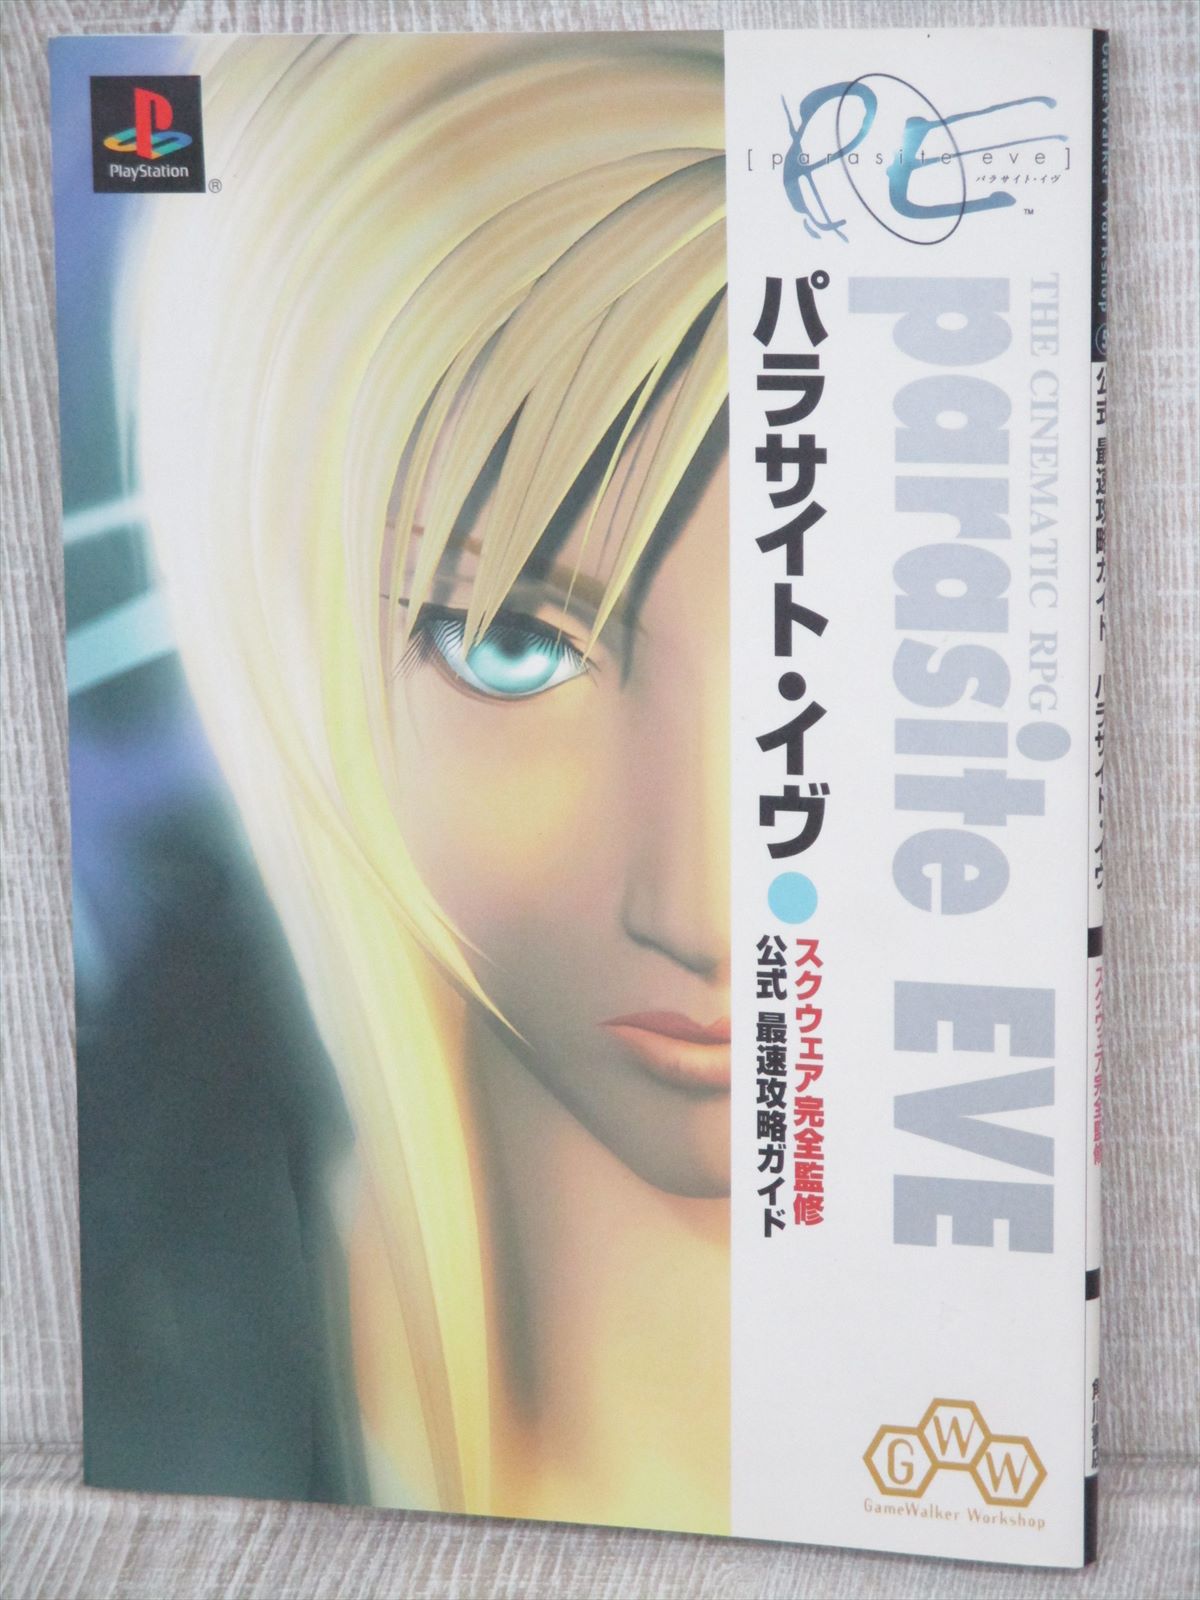 Parasite Eve Official Guide Sony Play Station Book Kd2x Ebay